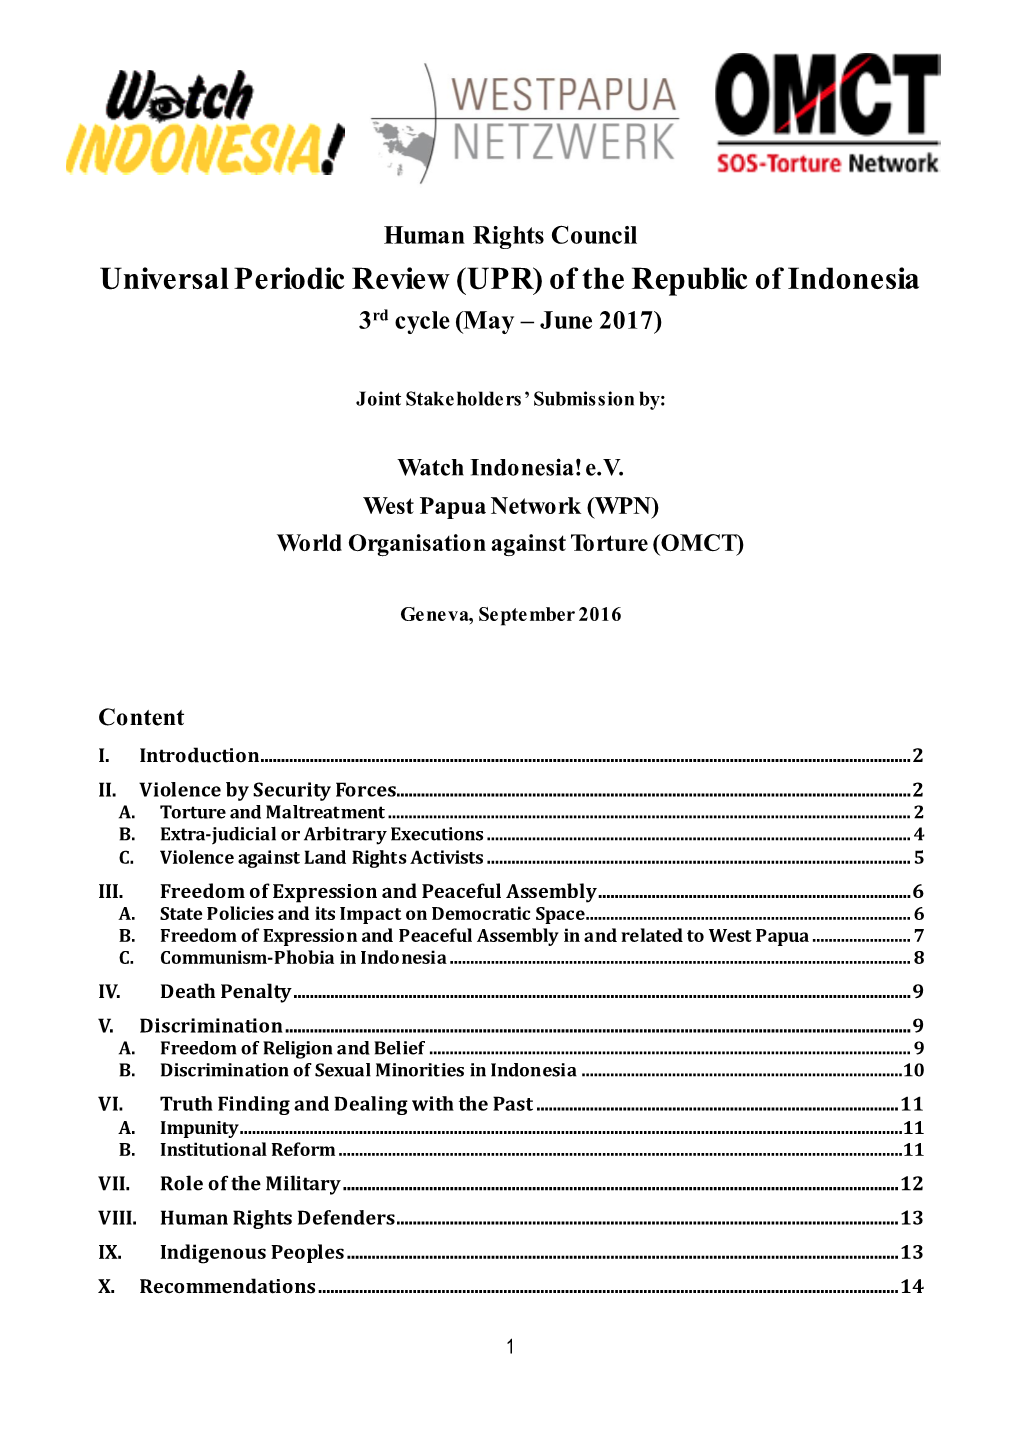 UPR) of the Republic of Indonesia 3Rd Cycle (May – June 2017